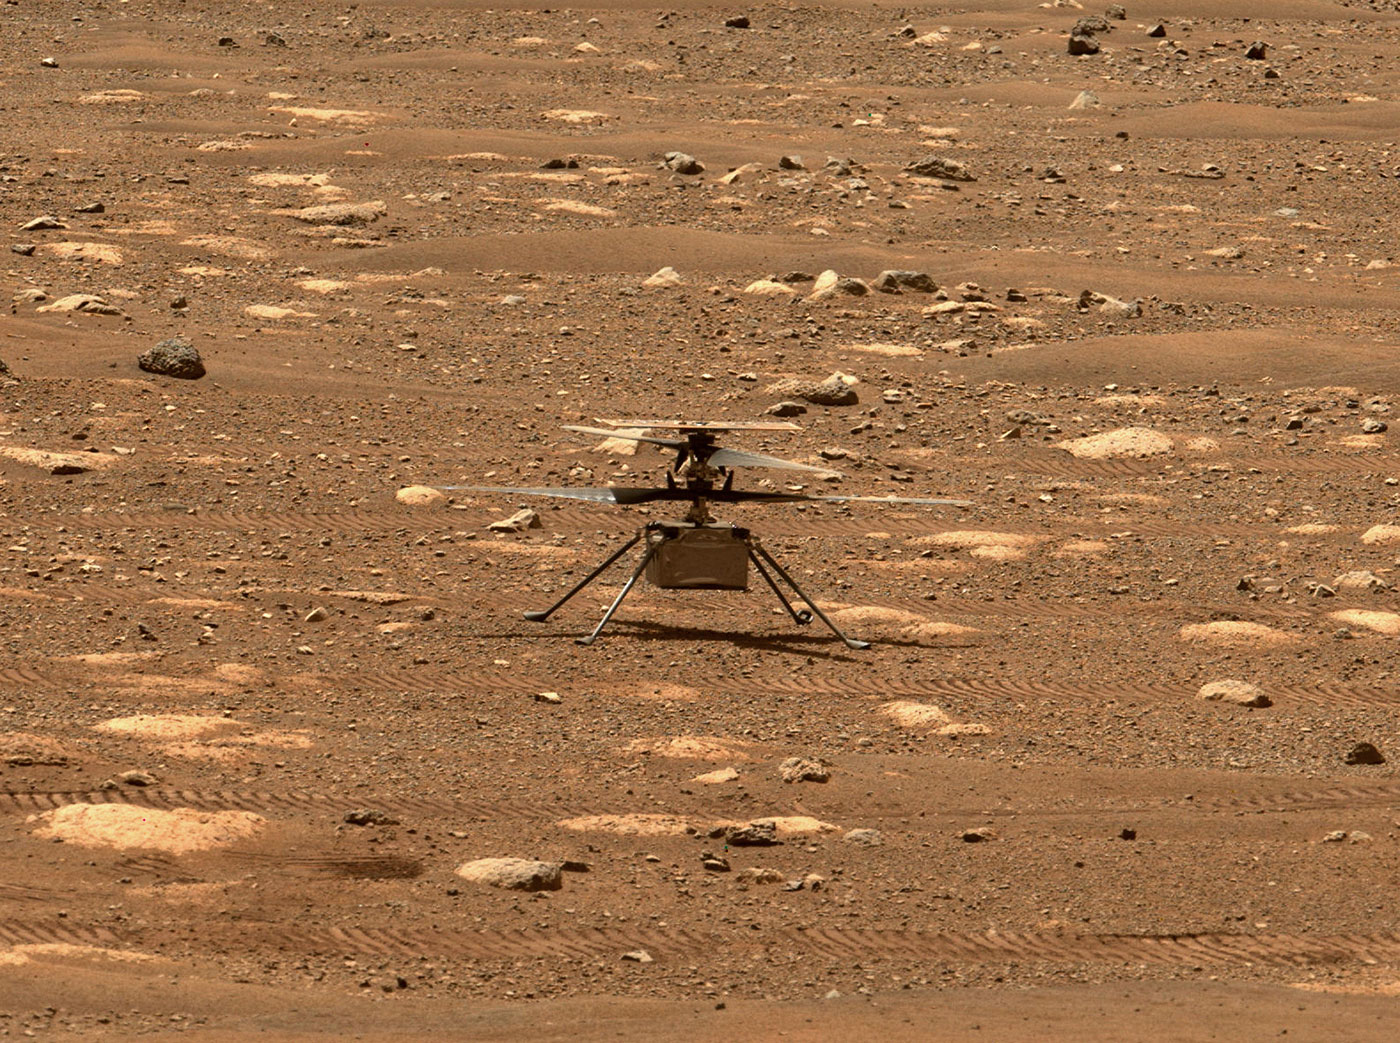 NASA’s Ingenuity Mars Helicopter Succeeds in Historic First Flight